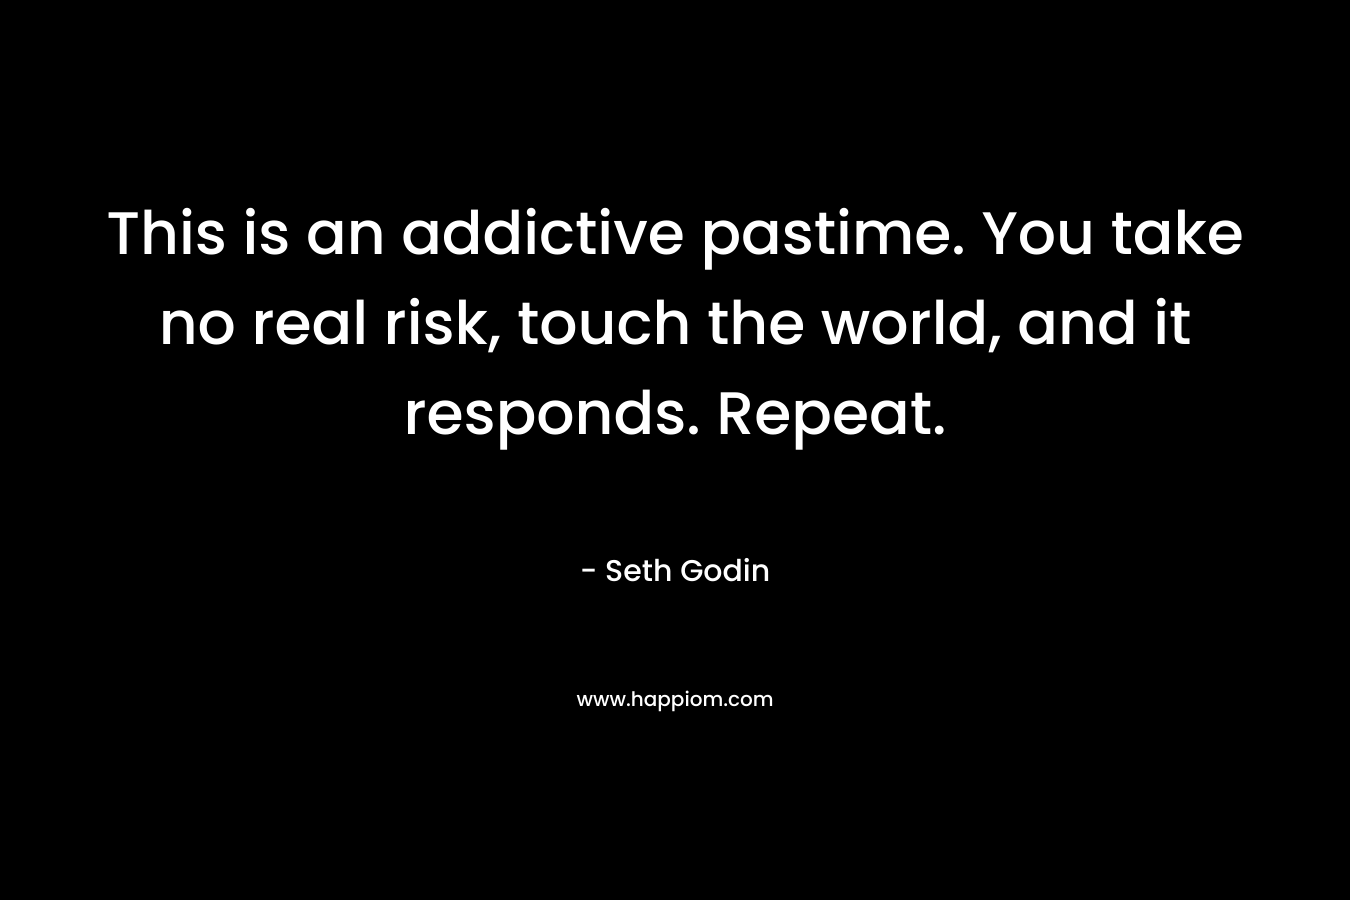 This is an addictive pastime. You take no real risk, touch the world, and it responds. Repeat.